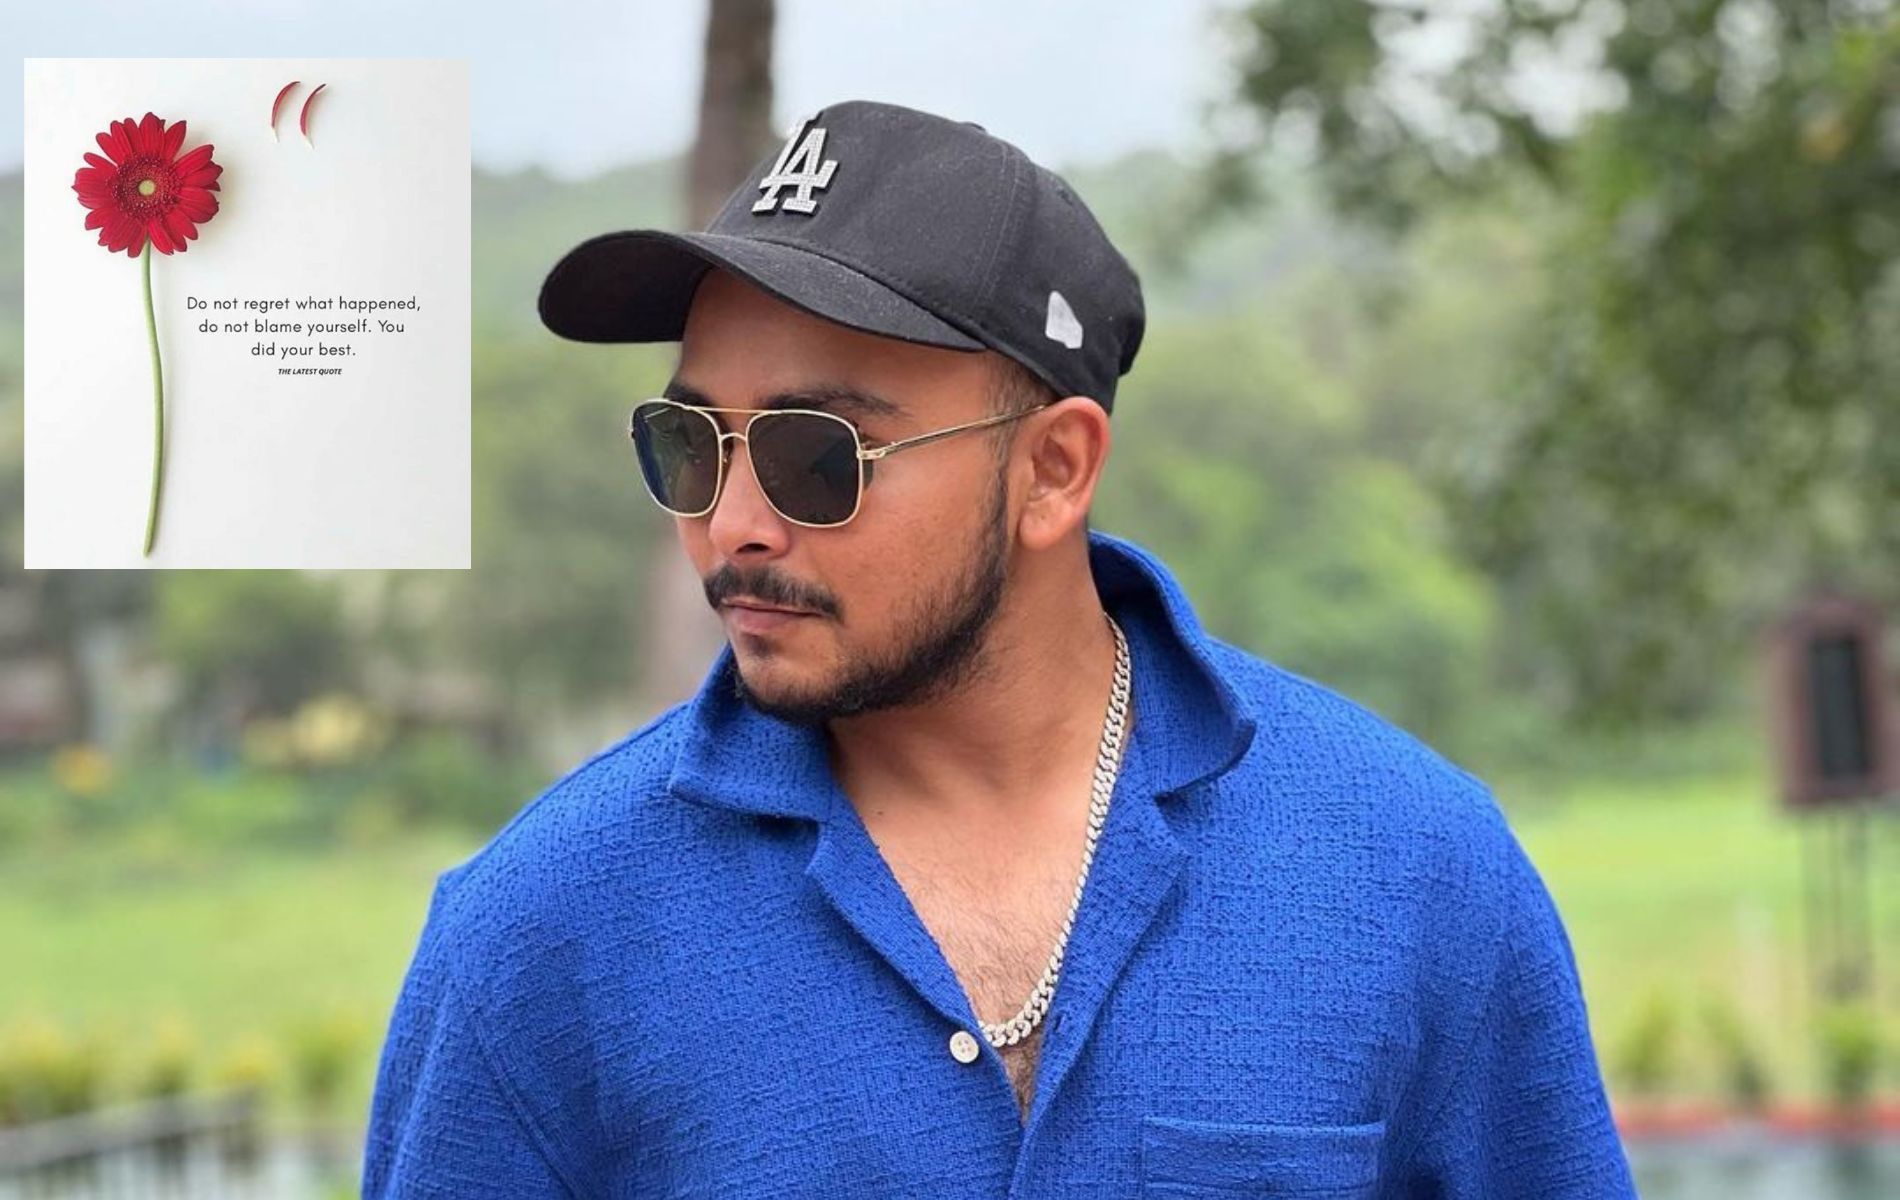 Prithvi Shaw last played for India in July 2021. (Pics: Instagram)